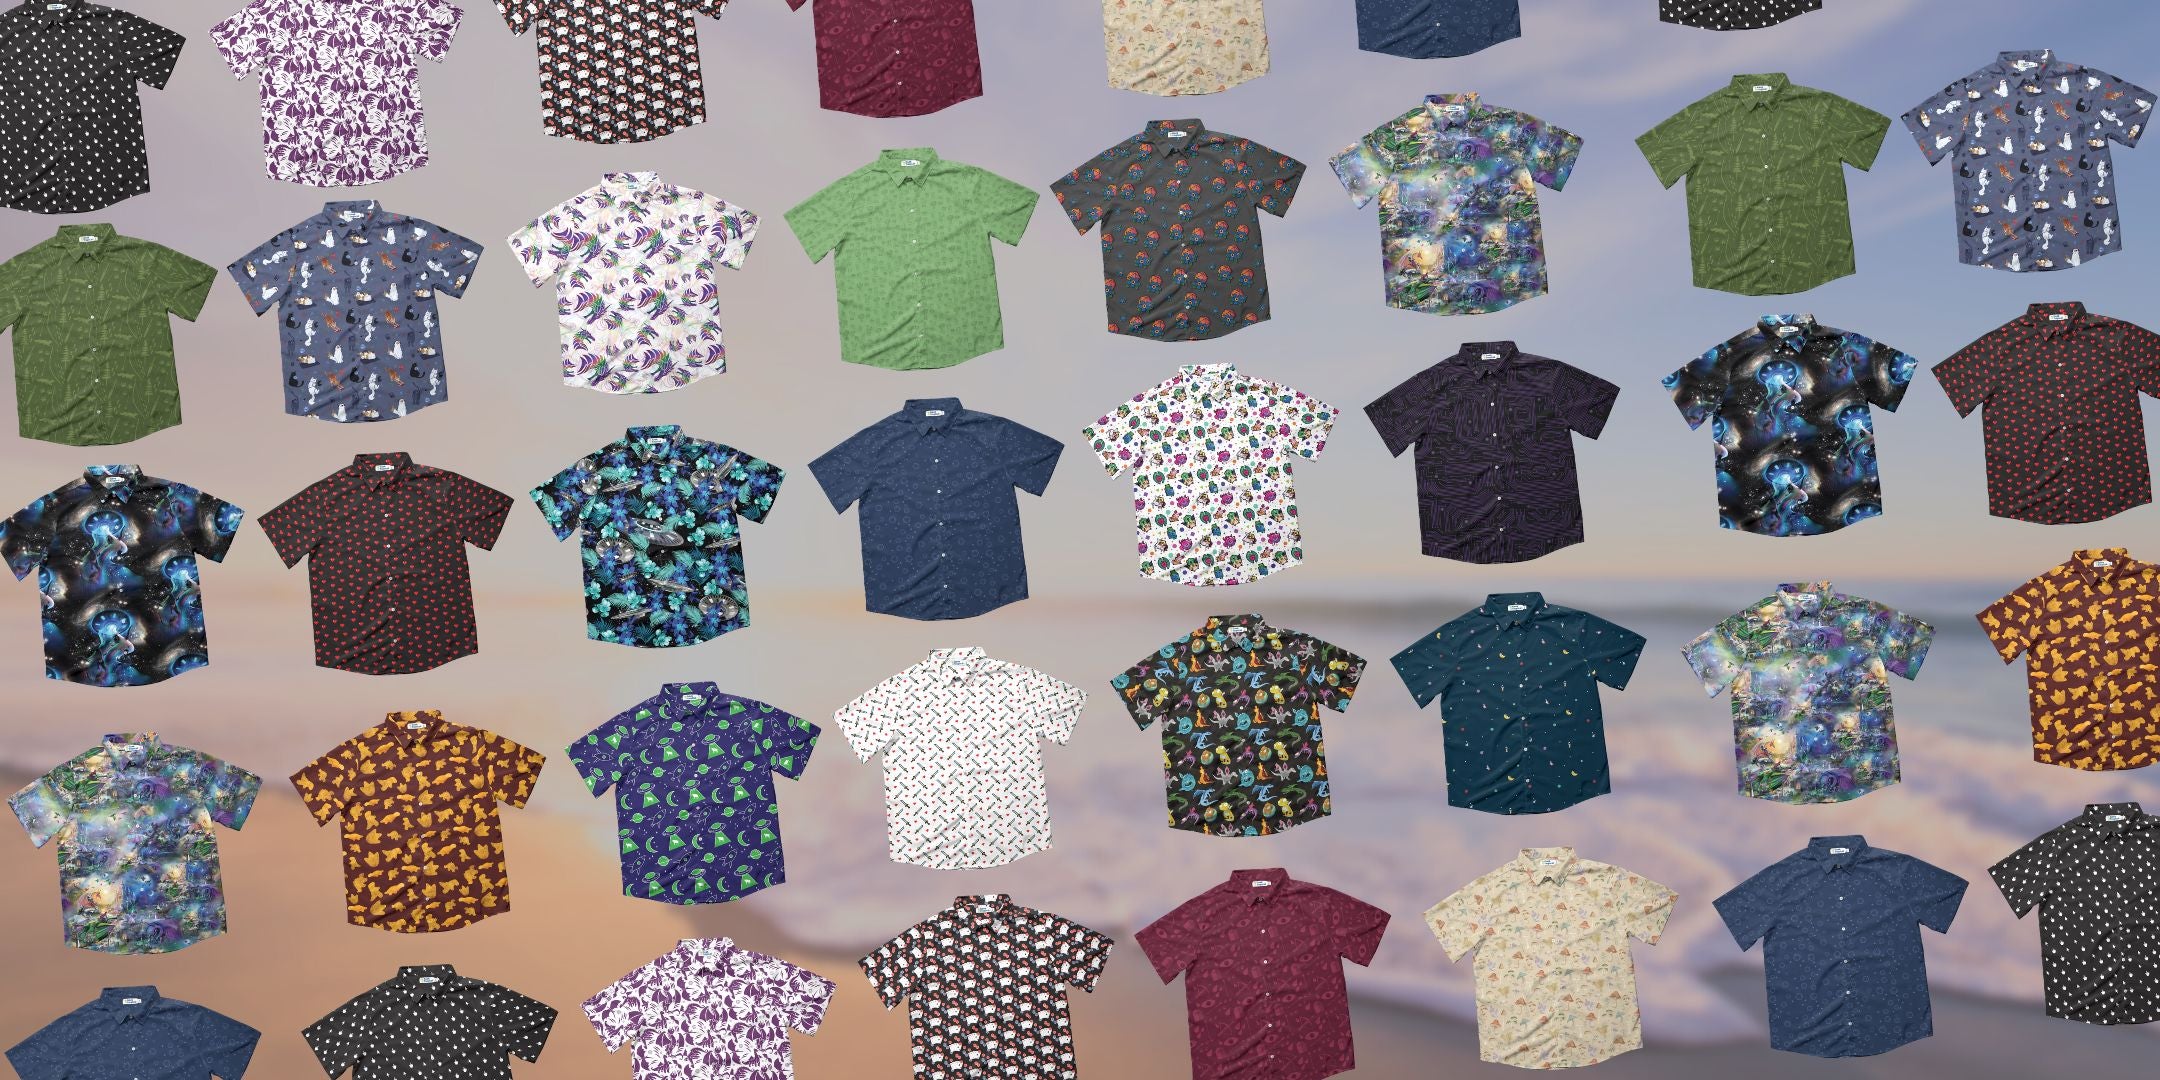 A pattern made up of several button up shirts with a beach background, featuring hawaiian shirts, tropical clothing, cool button up shirts, and unique button up shirts.